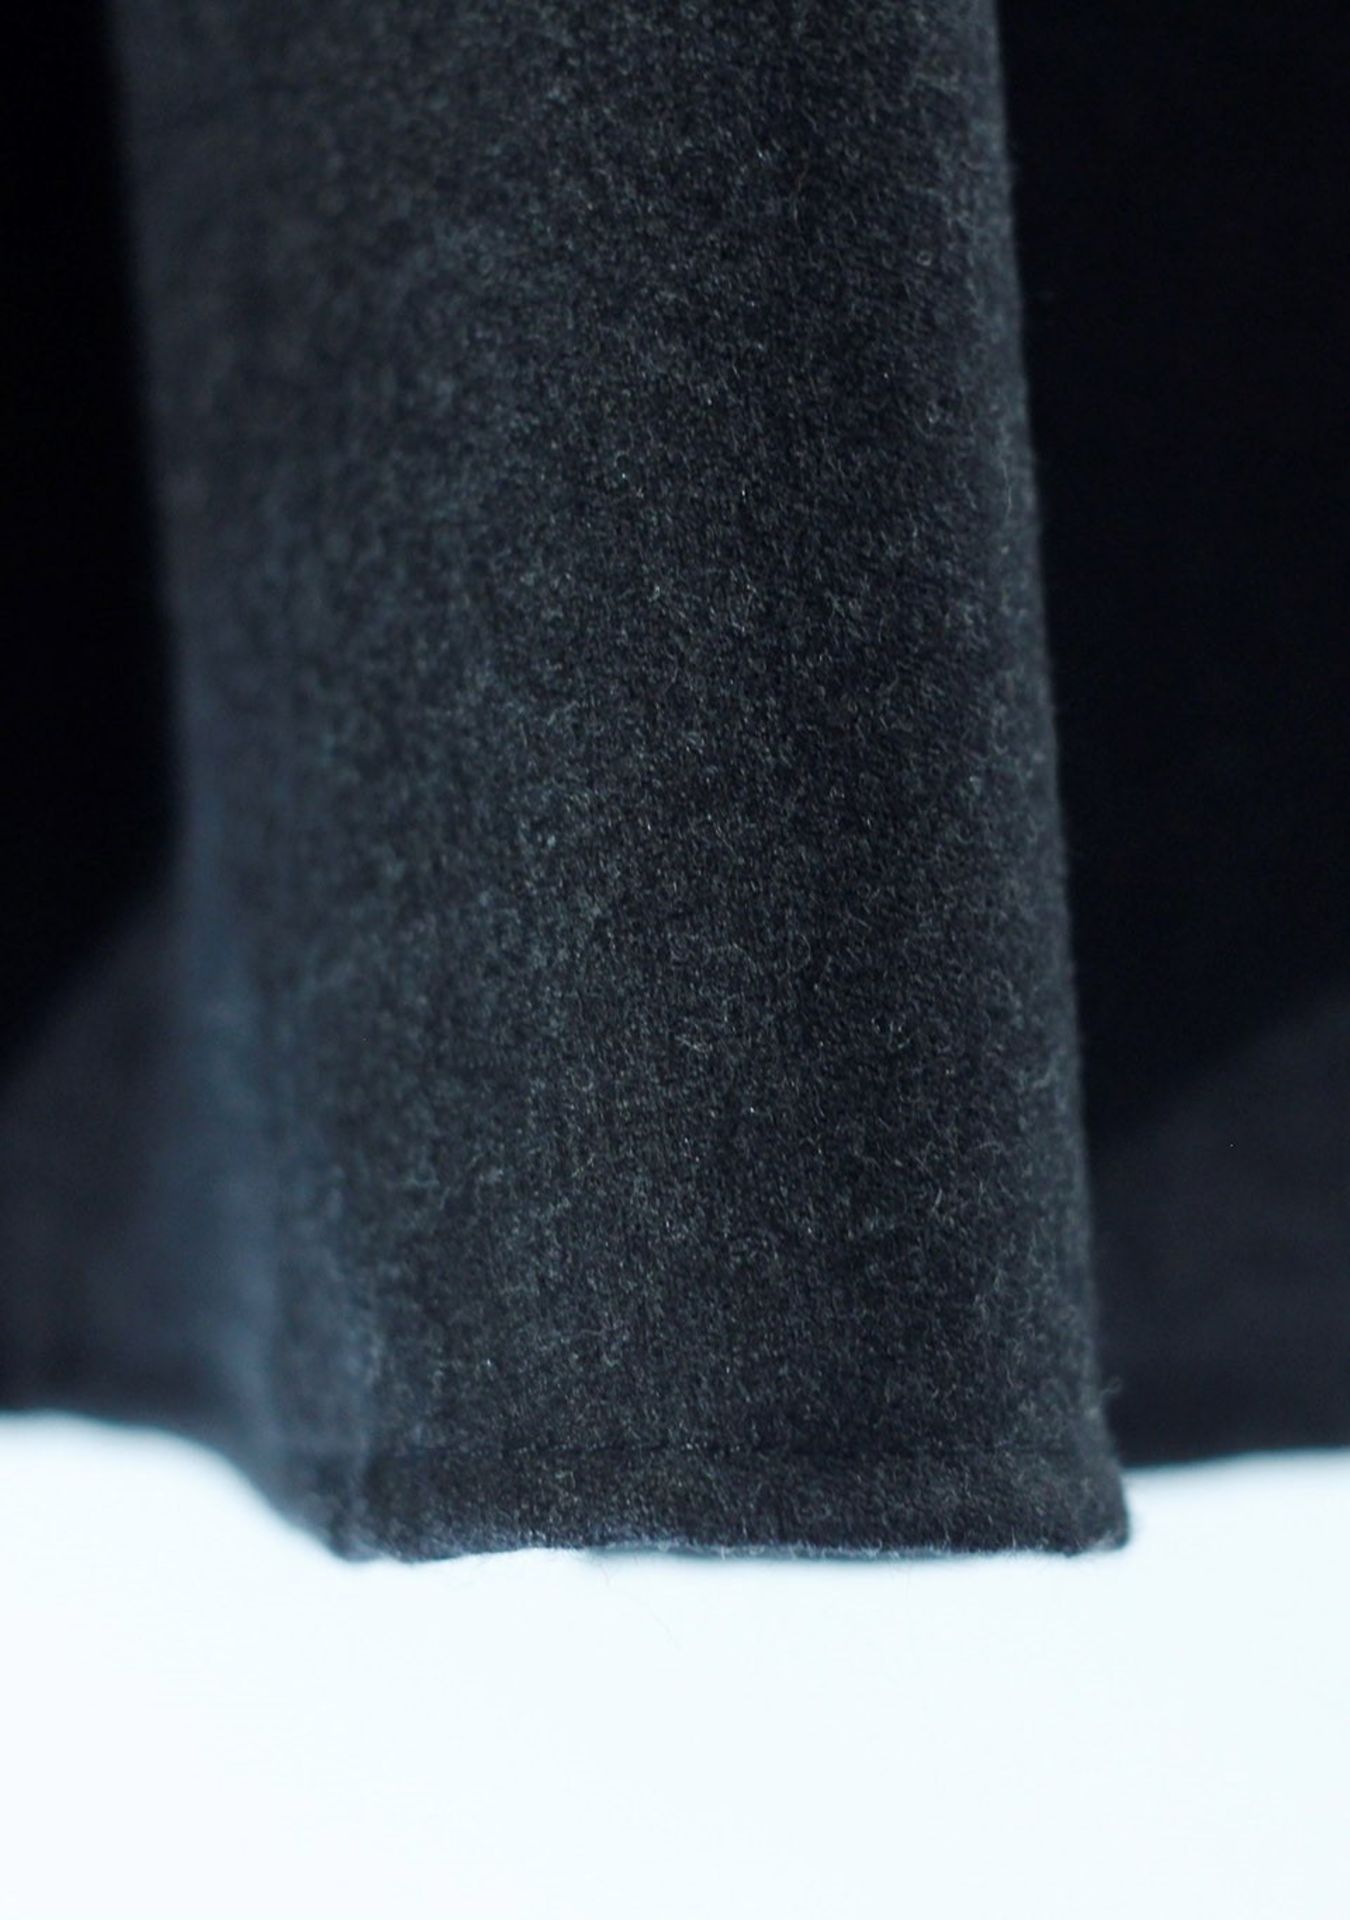 1 x Anne Belin Dark Grey Skirt - Size: 18 - Material: 100% Wool - From a High End Clothing - Image 8 of 9